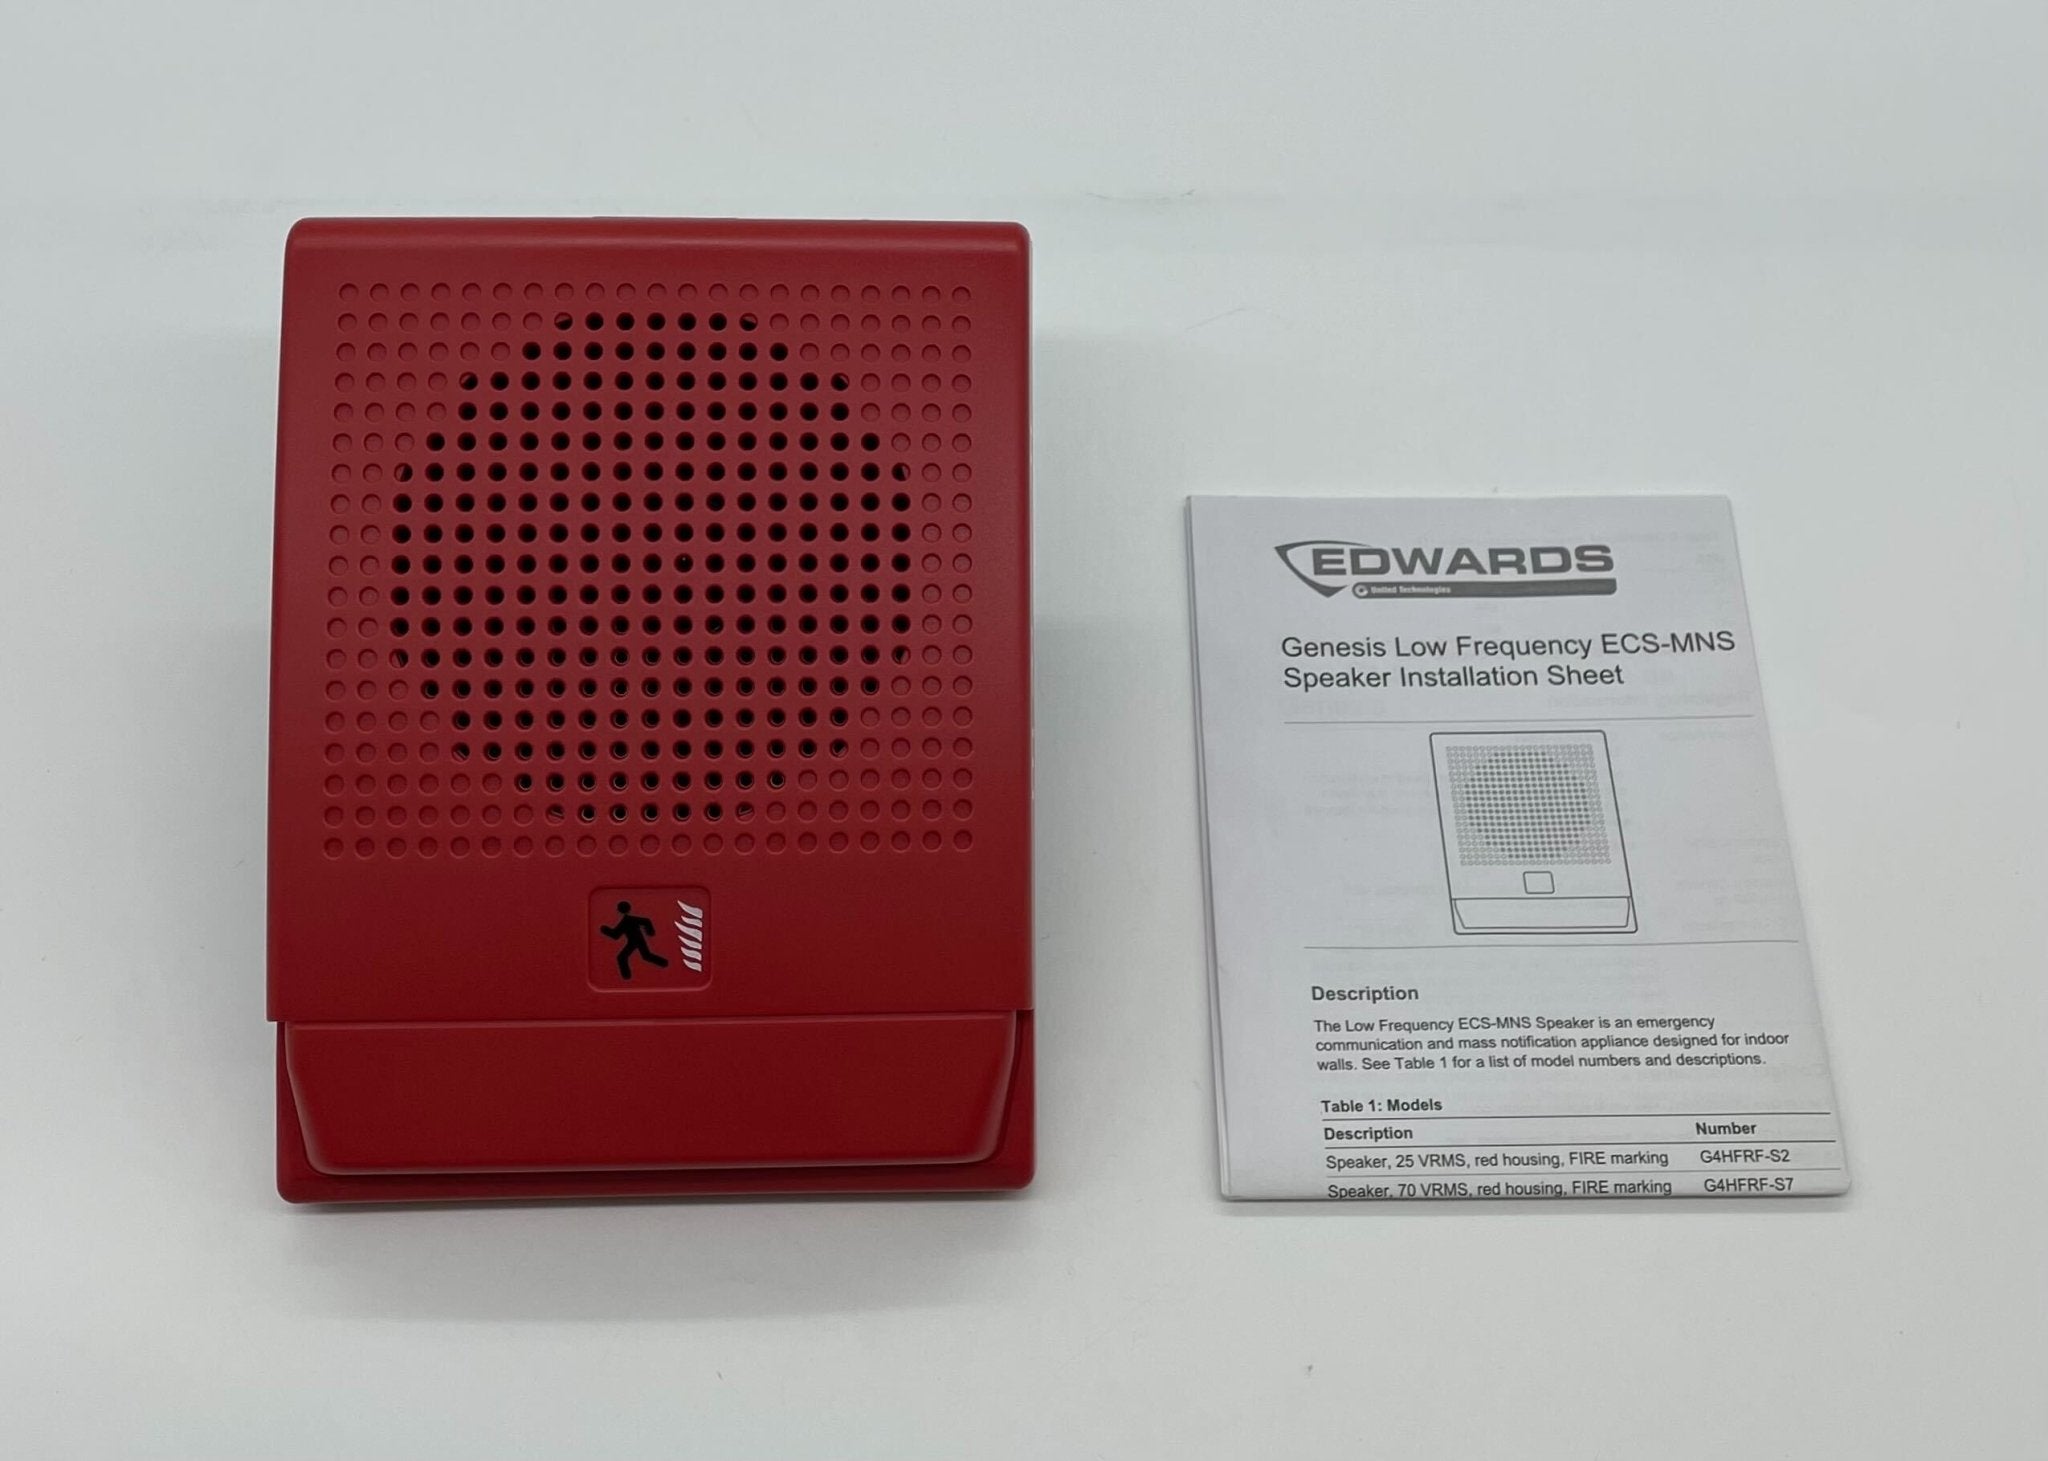 Edwards G4HFRF-S2 - The Fire Alarm Supplier